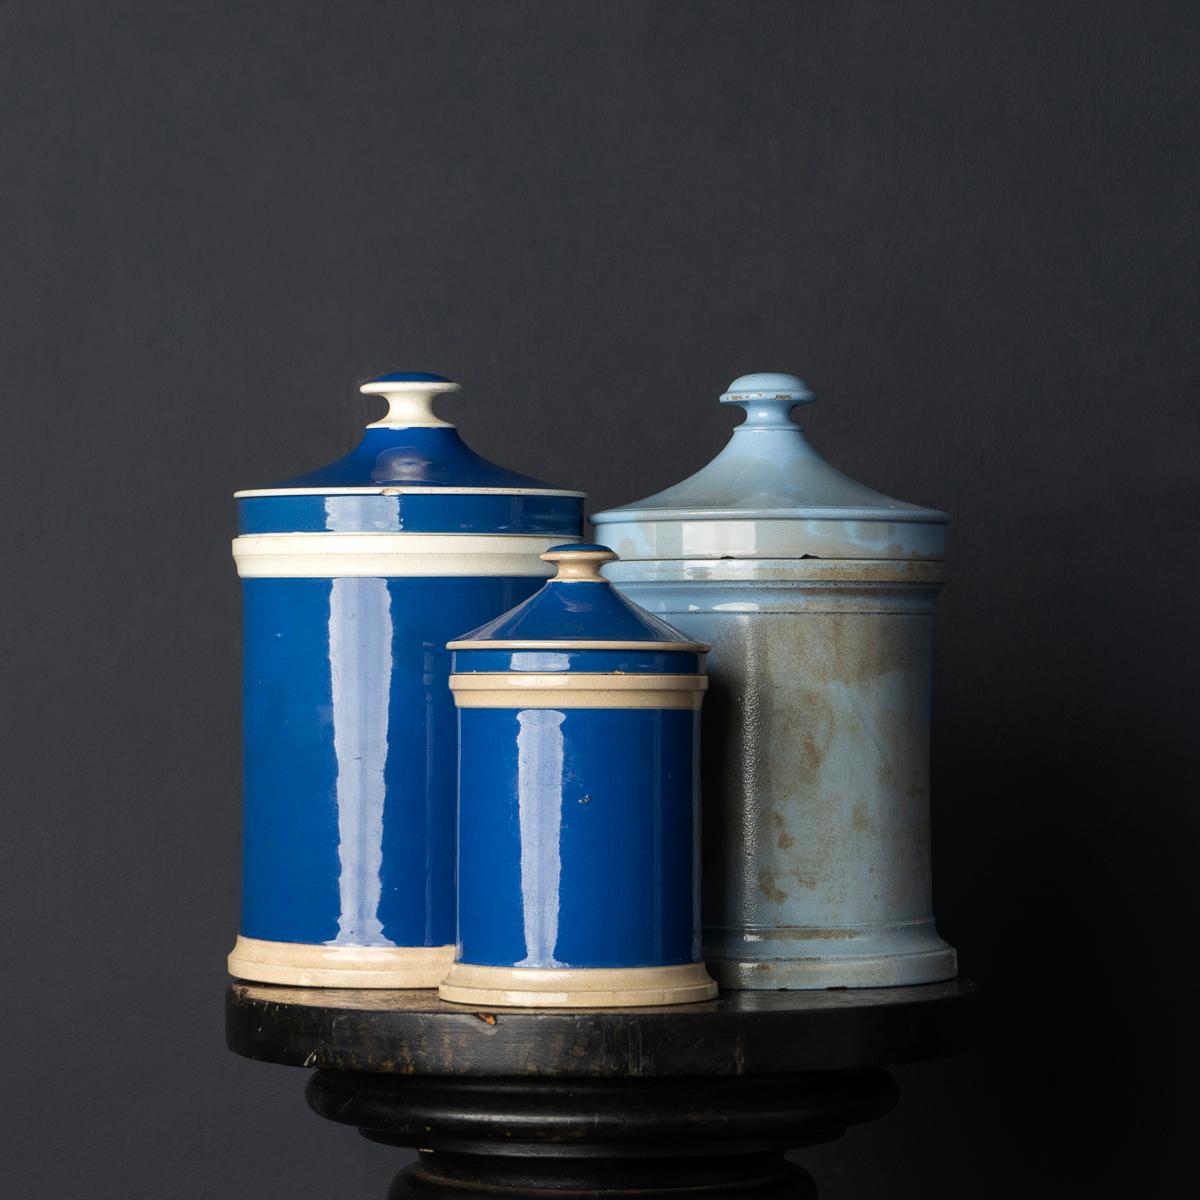 European Collection of Antique Blue Porcelain Apothecary Jars, 19th Century